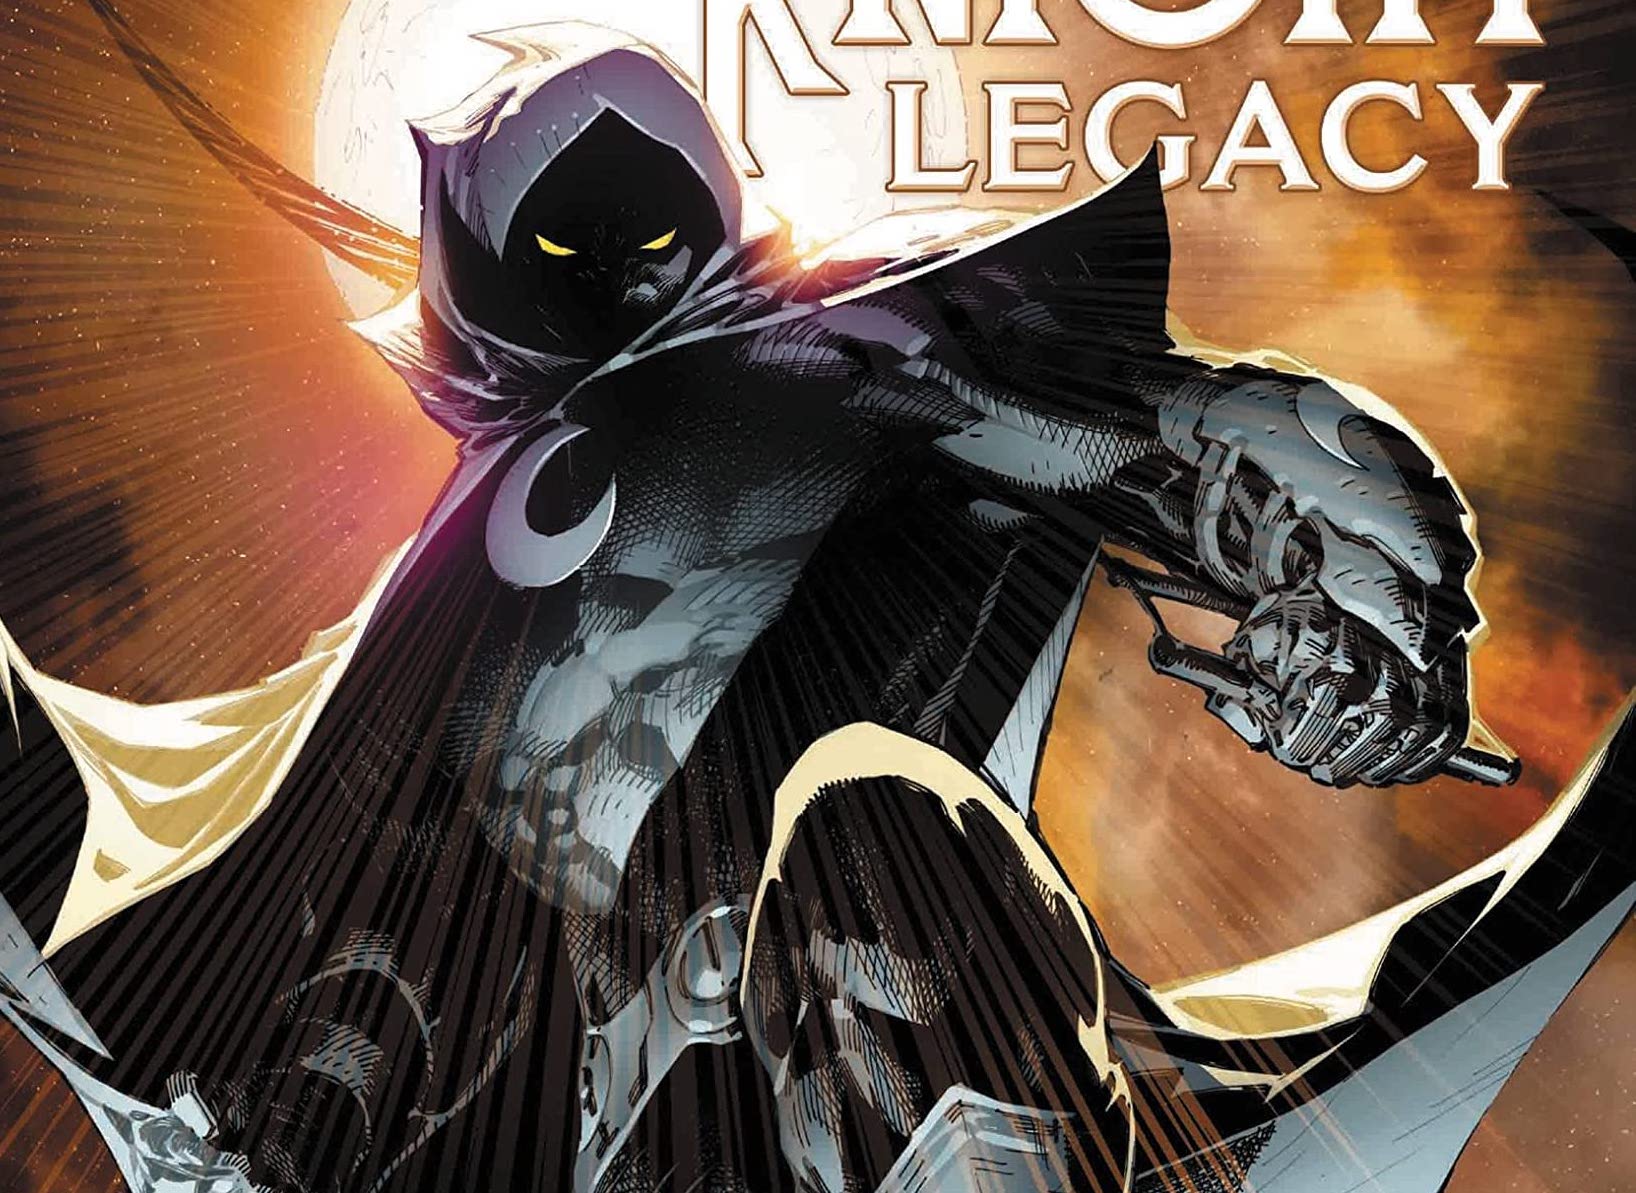 'Moon Knight Legacy: The Complete Collection' fails in its attempts to define the character